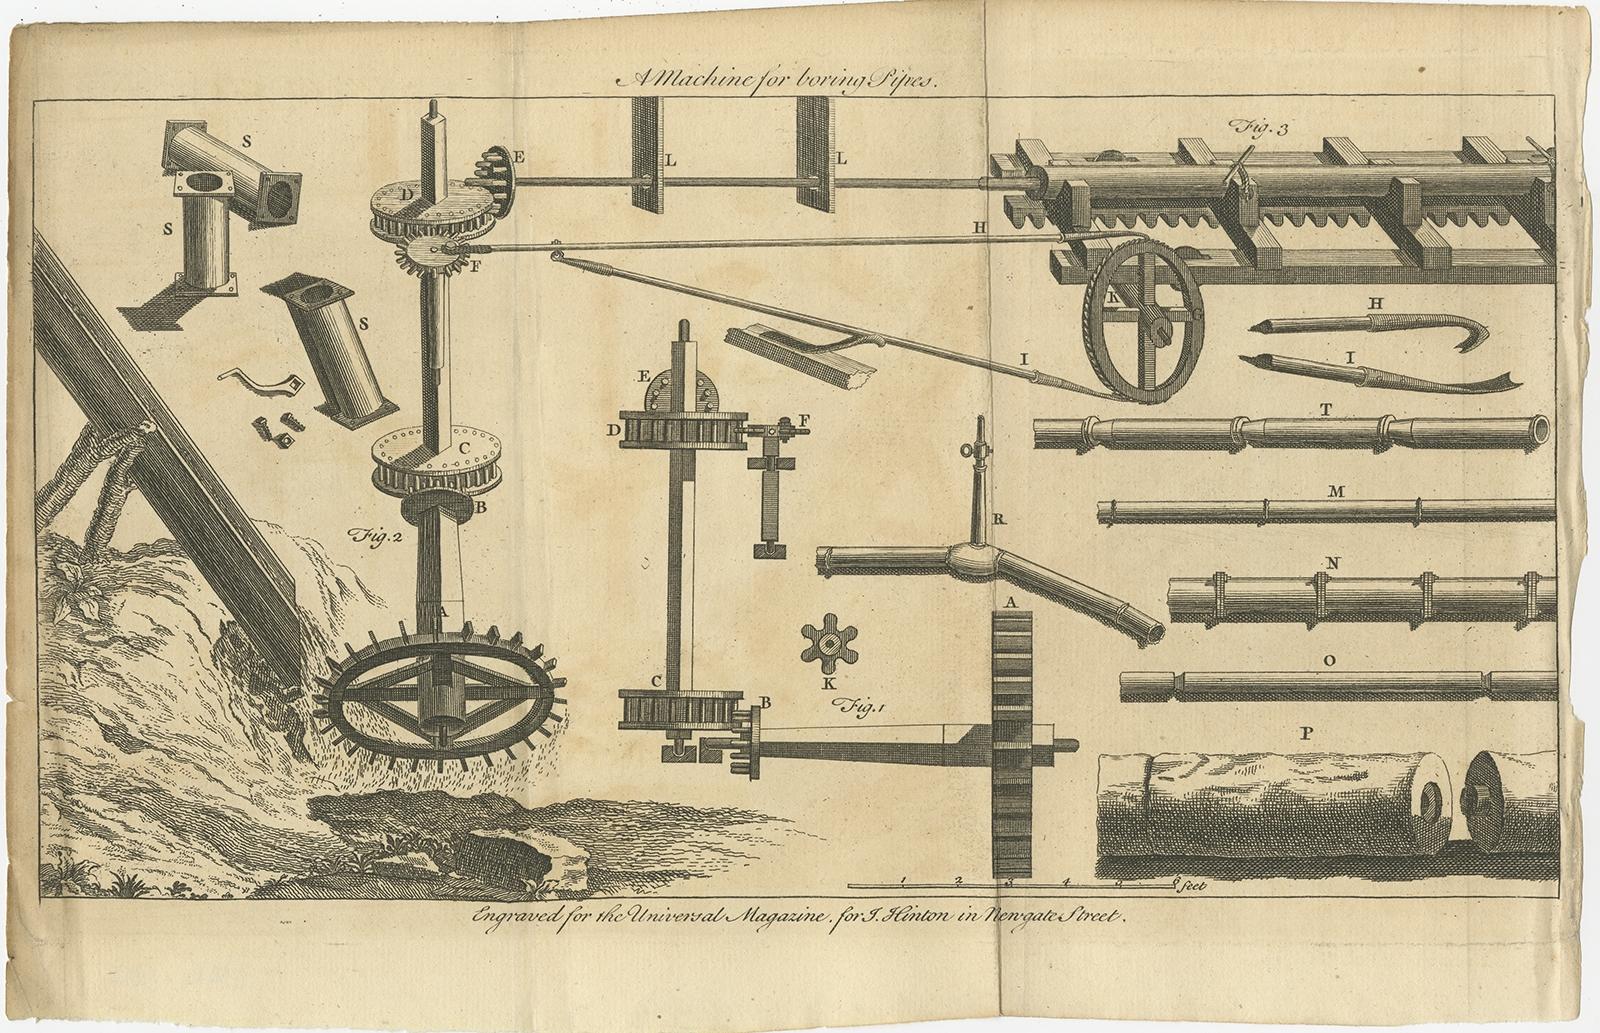 Antique print titled 'A machine for boring Pipes'. 

Print of a machine for boring pipes. This print originates from 'The Universal Magazine of Knowledge and Pleasure'. 

Artists and Engravers: The Universal Magazine of Knowledge and Pleasure